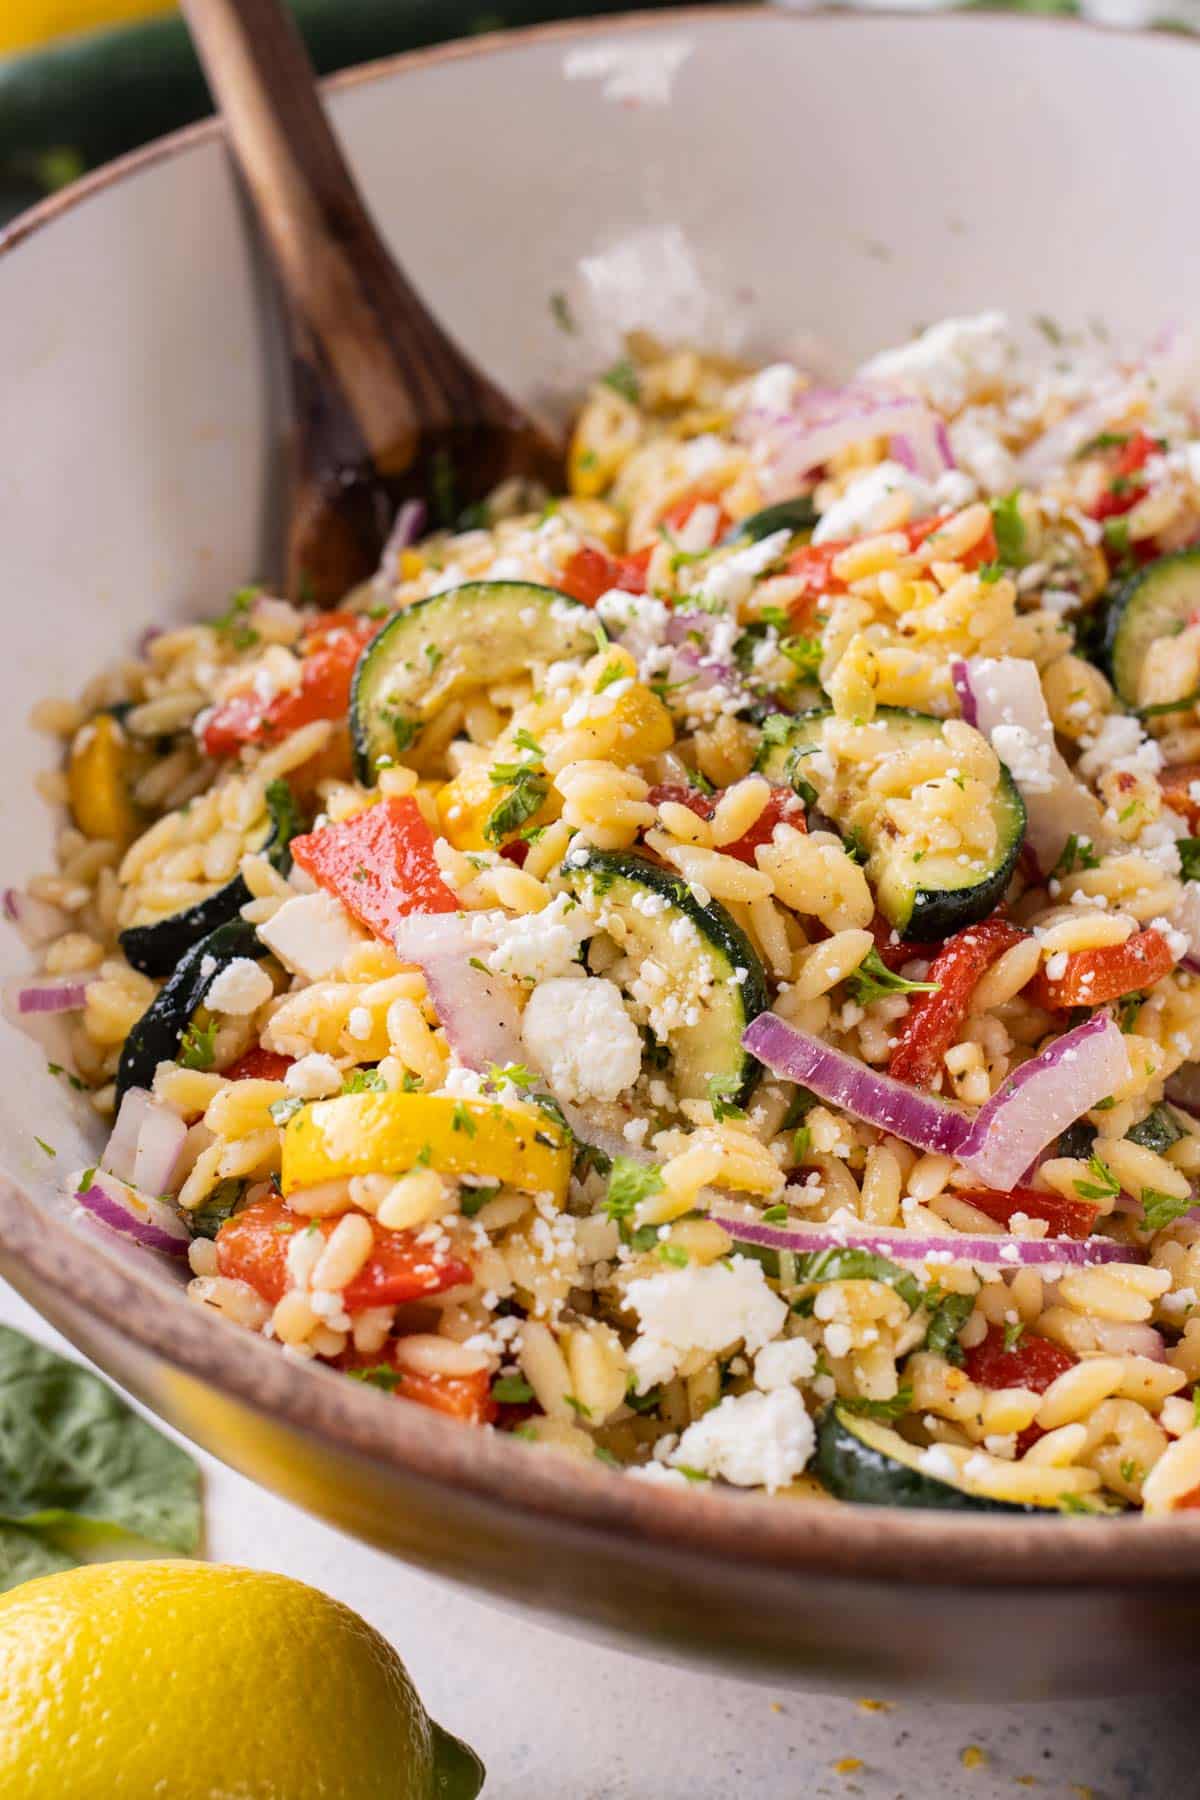 Lemon Orzo Pasta Salad with Feta RECIPE served in a bowl with a wooden spoon.